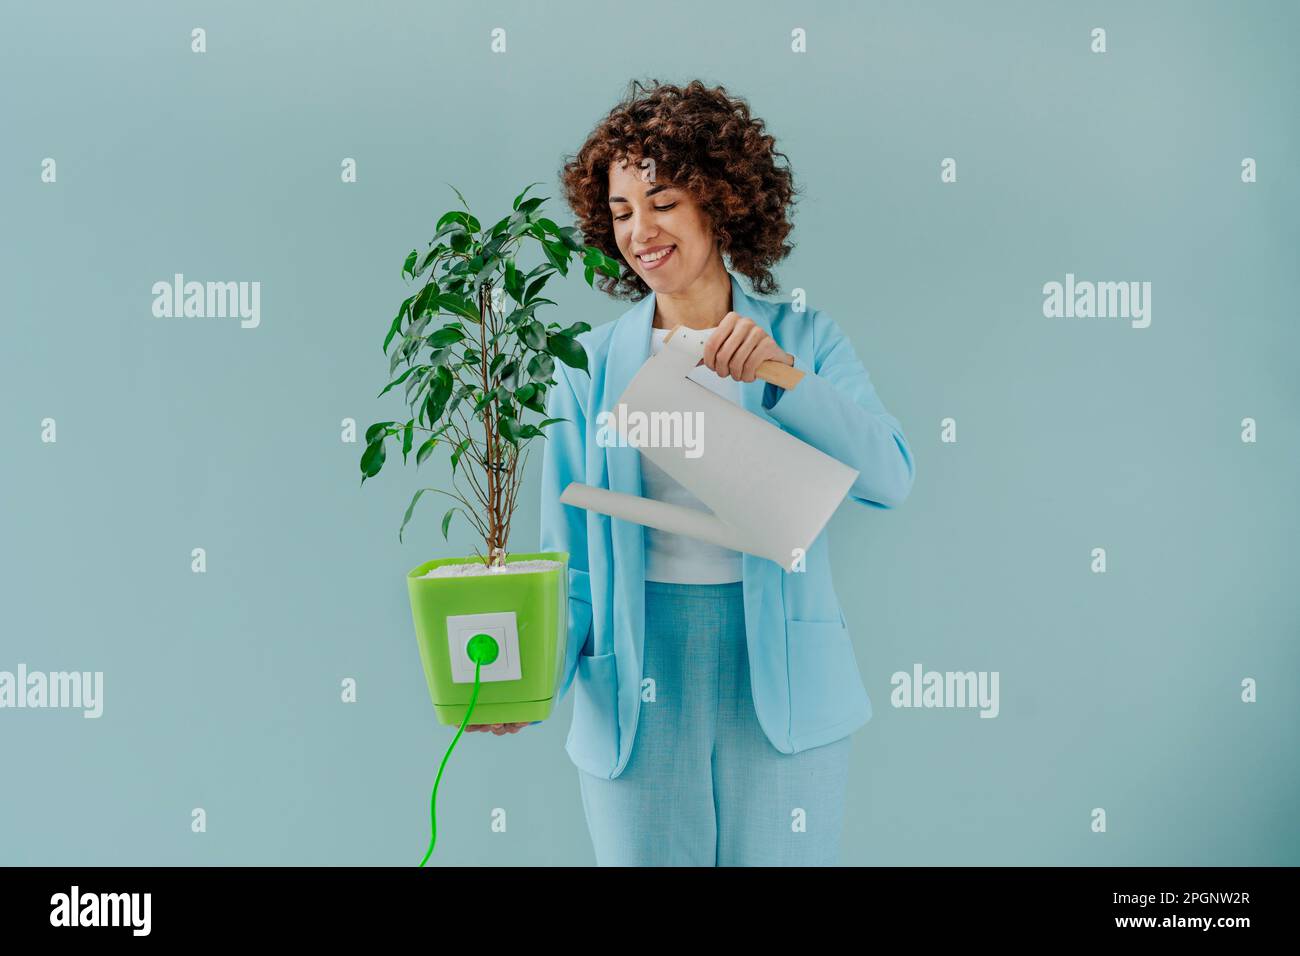 Happy woman watering potted plant connected with electric plug against blue background Stock Photo